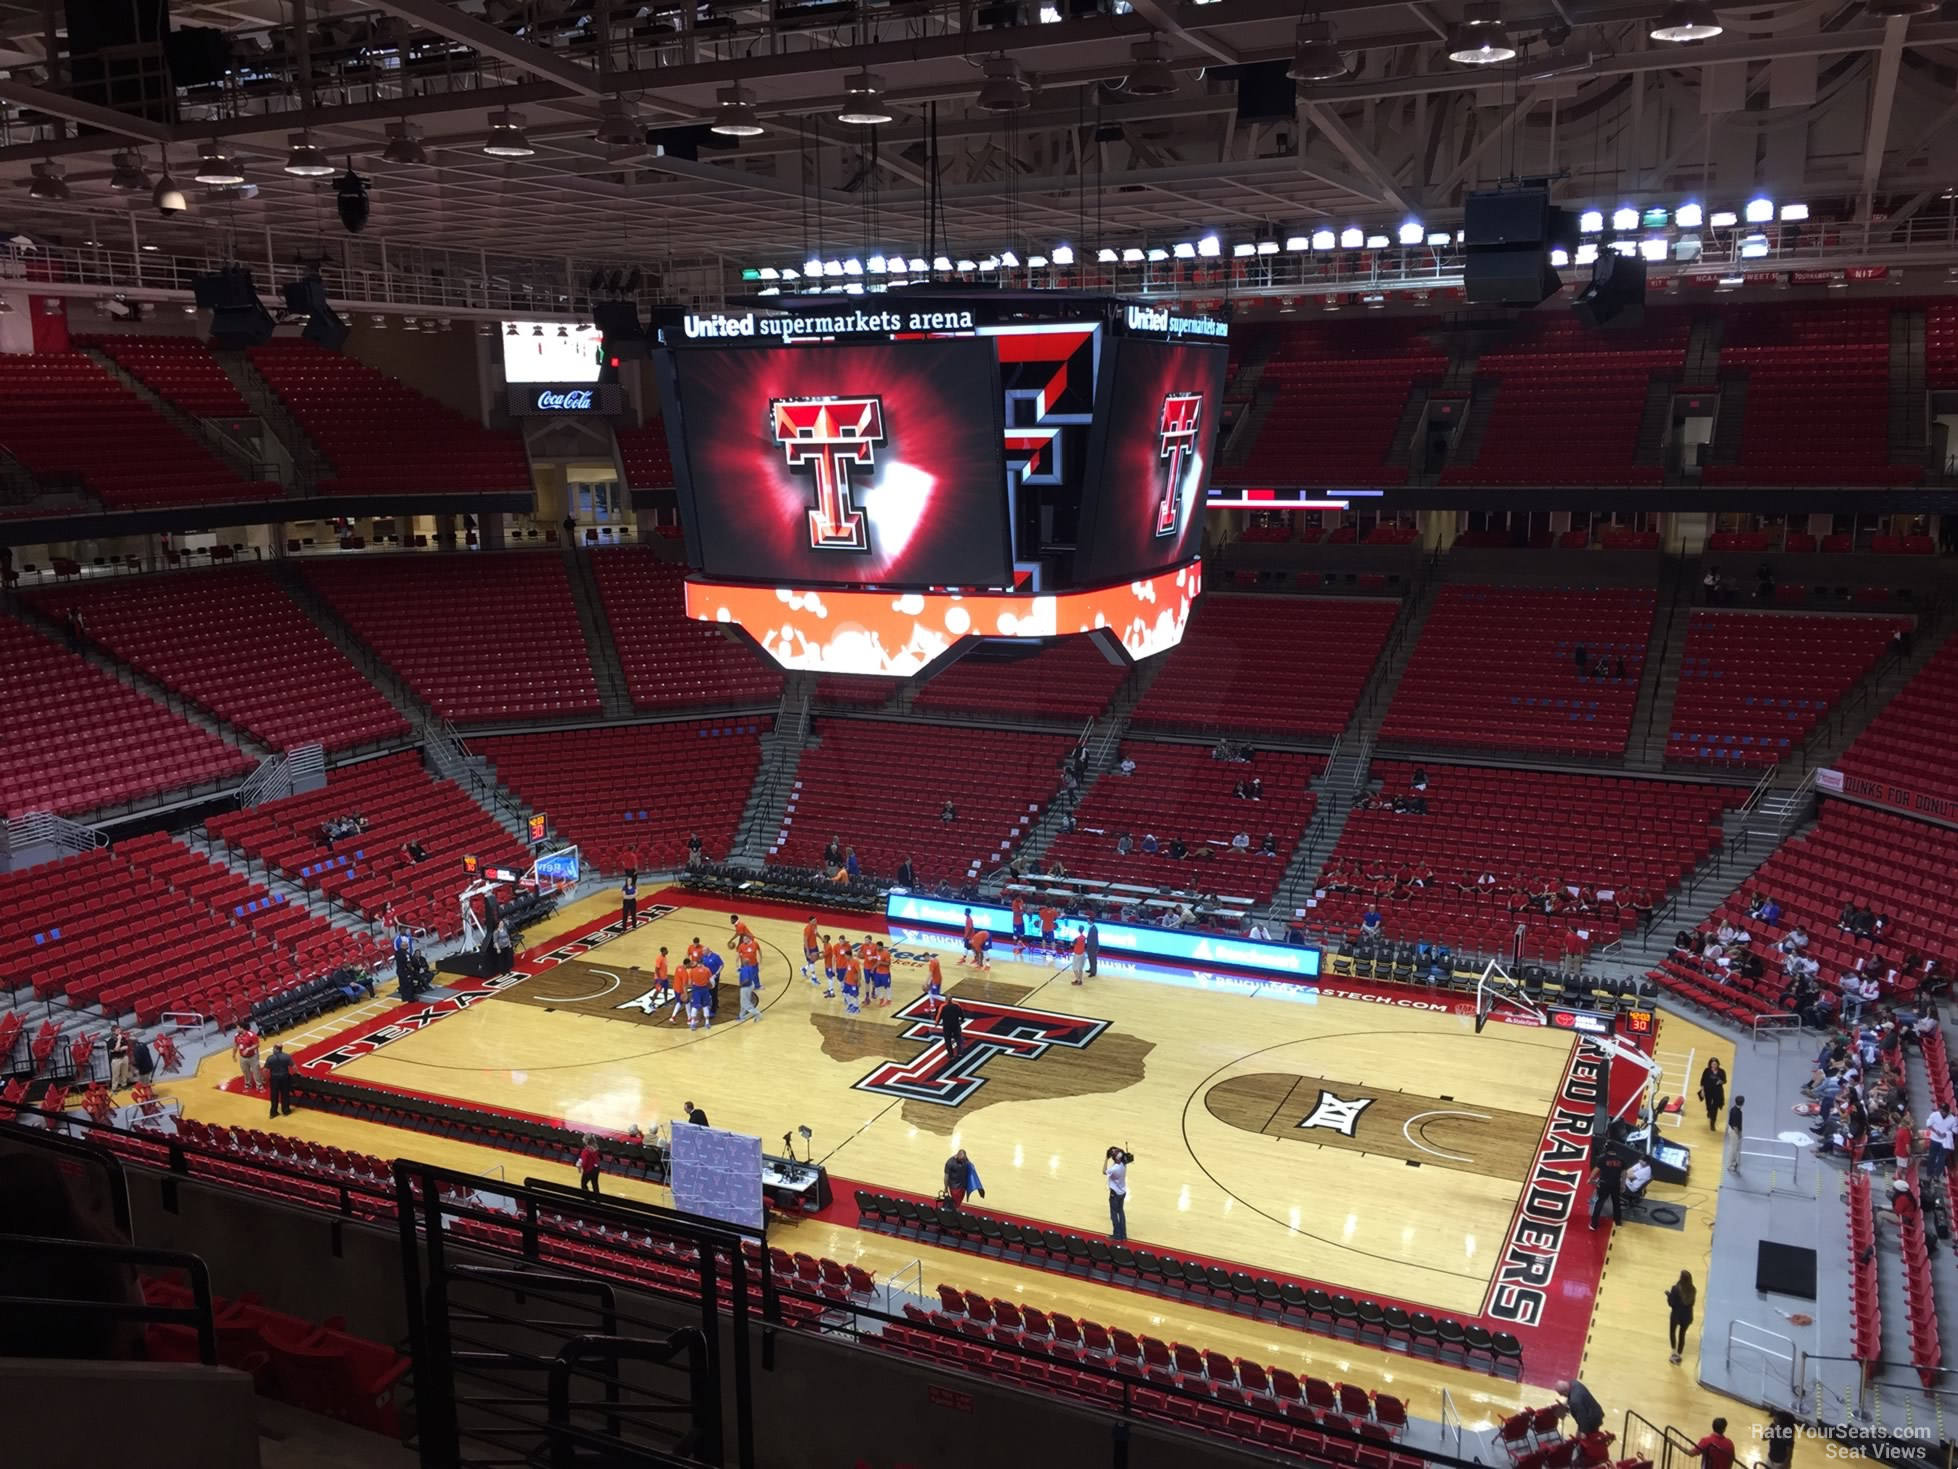 section 231, row 7 seat view  - united supermarkets arena